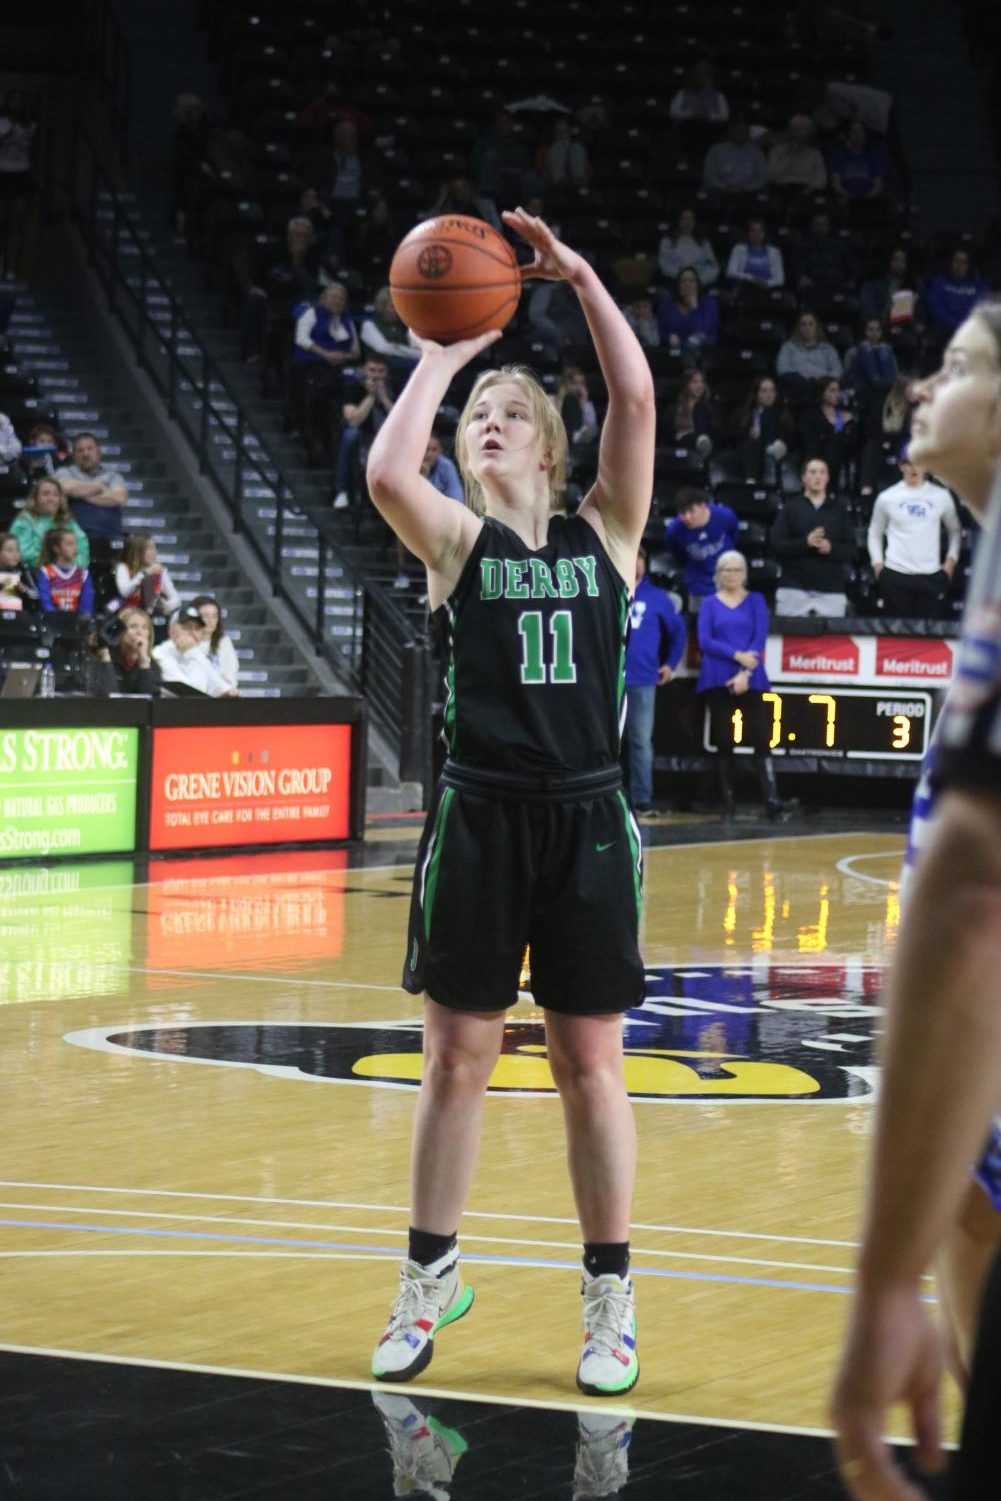 Girls+state+championship+vs+Washburn+Rural+%40+Koch+Arena+%28Photos+by+Janeah+Berry%29